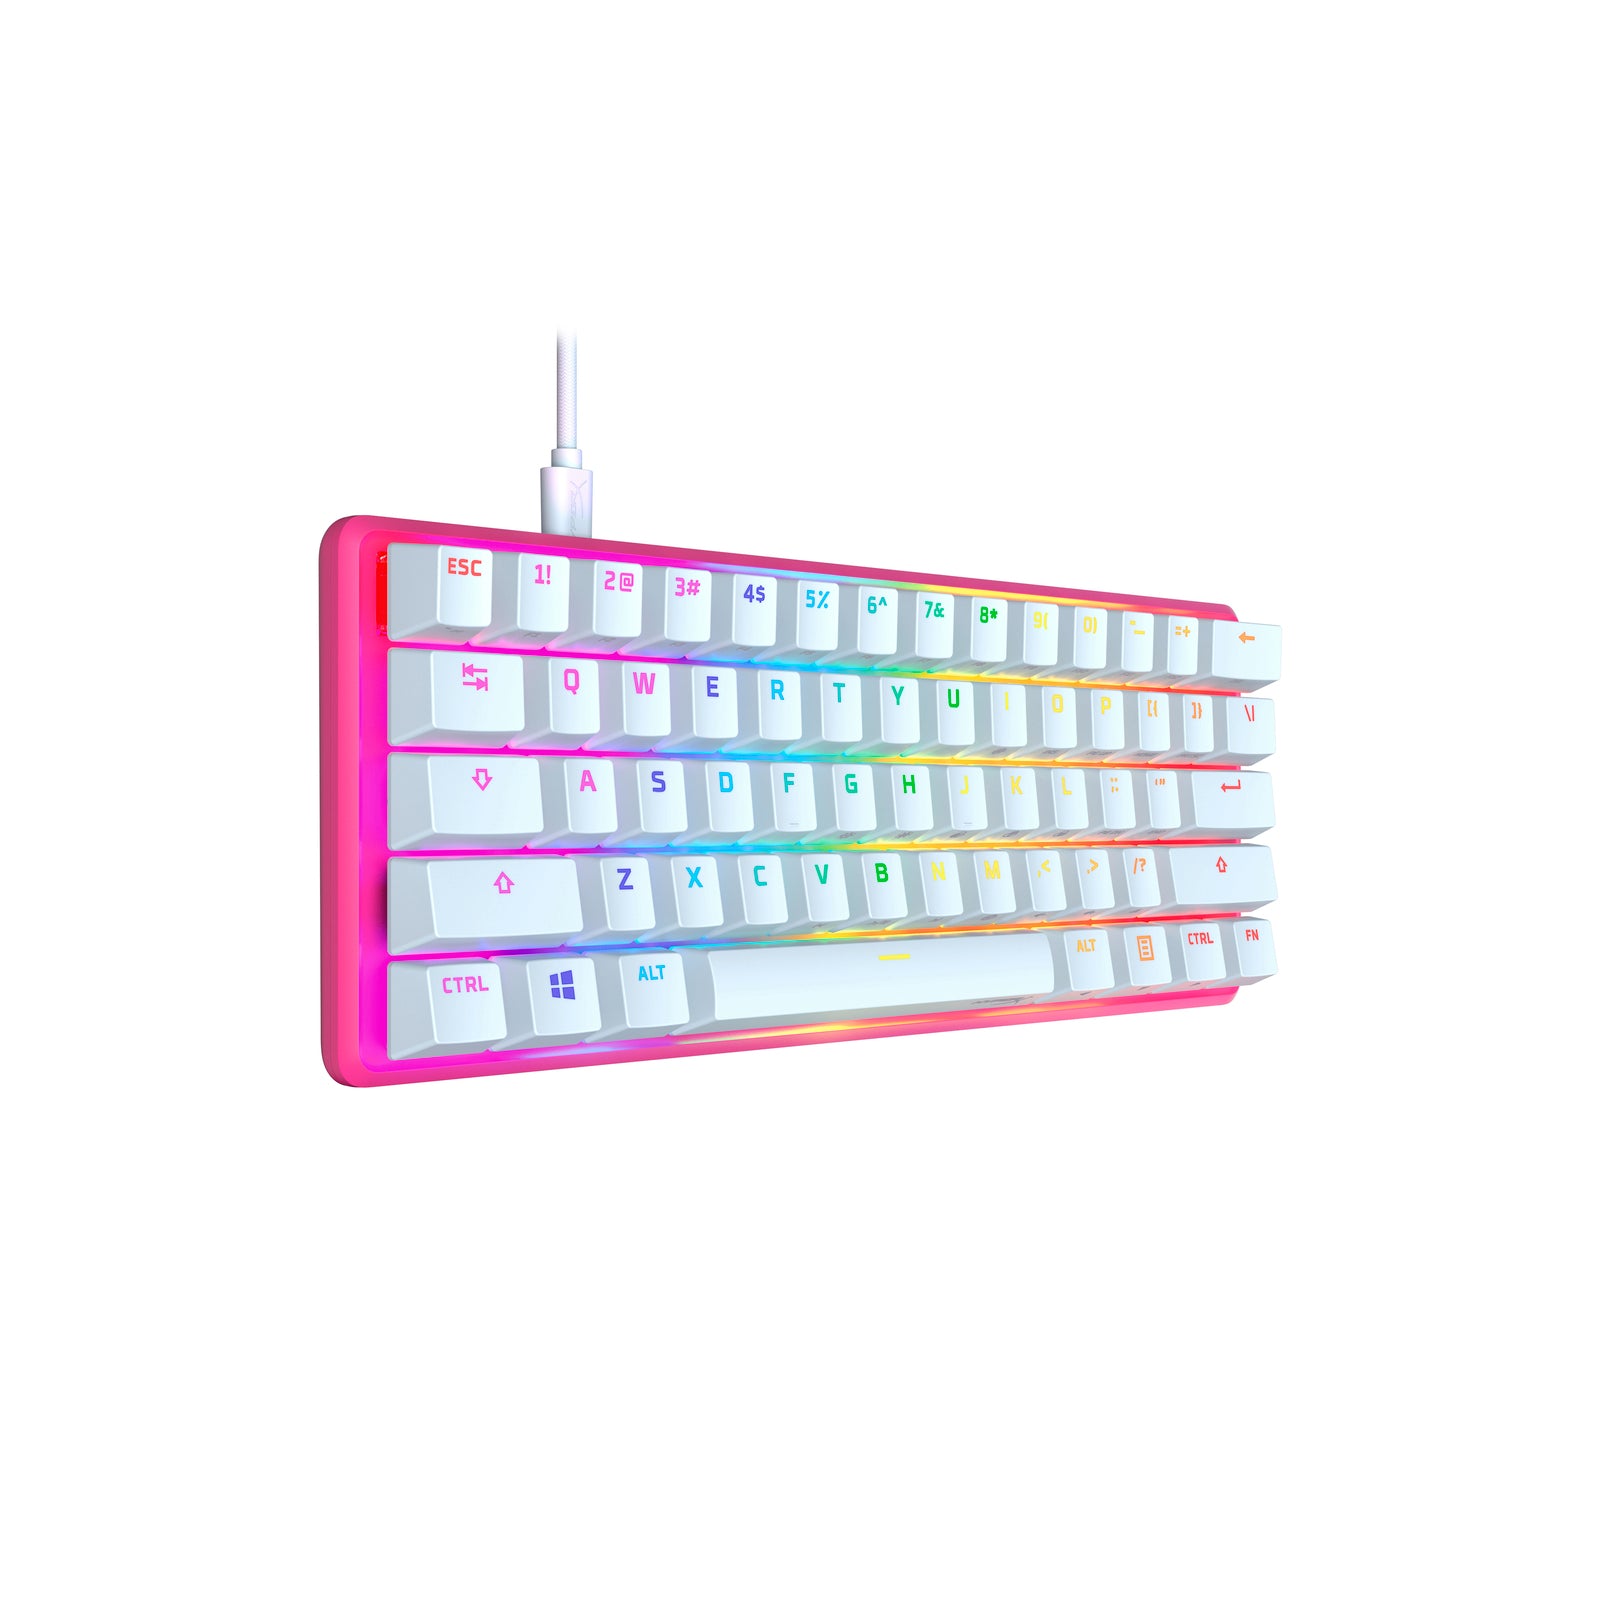 HyperX Alloy Origins 60 Pink Gaming Mechanical Keyboard showing the left side view featuring customizable RGB lighting